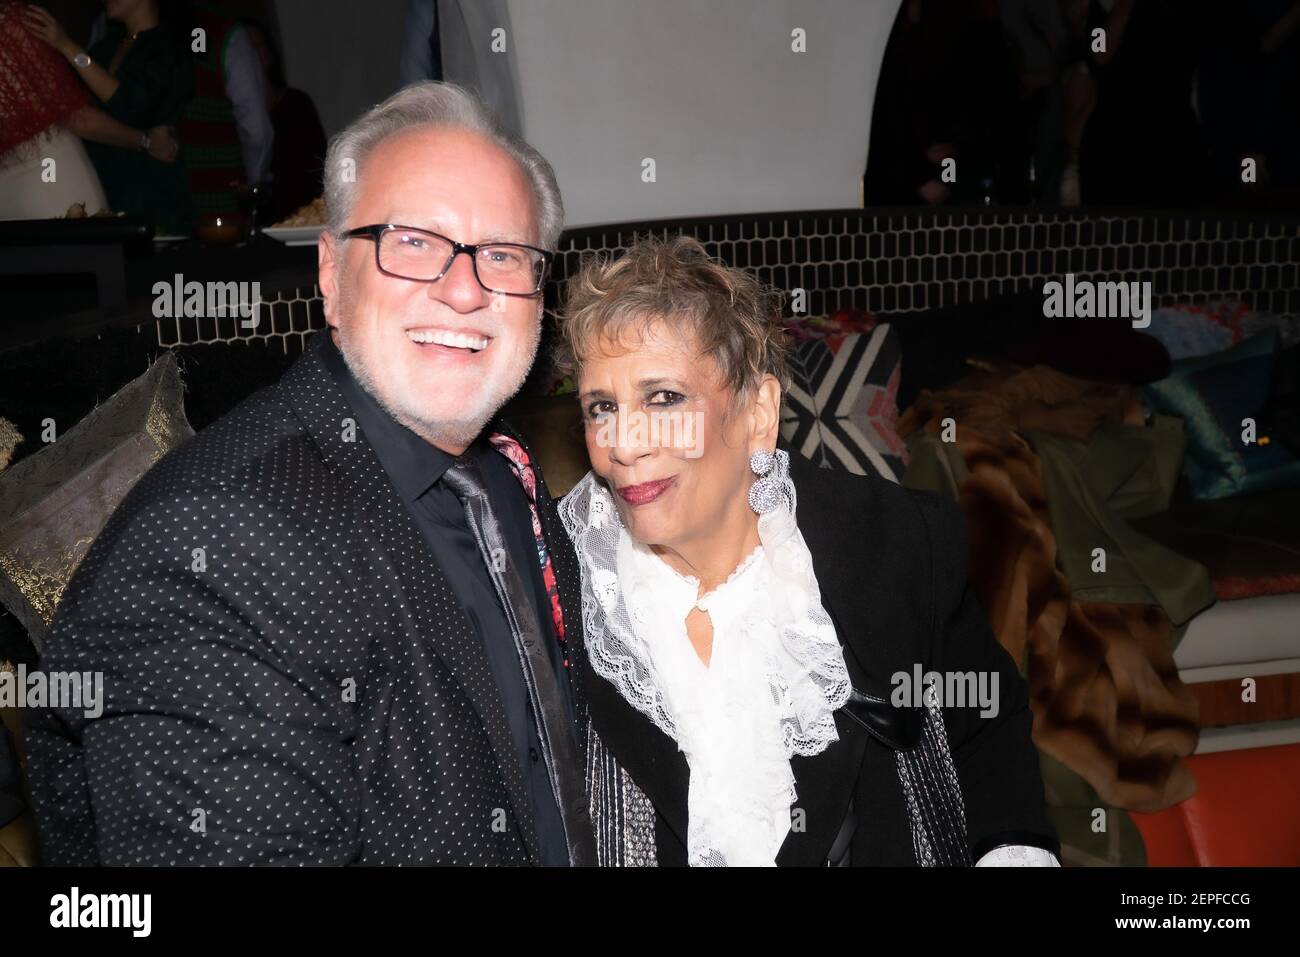 Michael Keegan and Lucia Kaiser celebrate Lucia Kaiser's birthday at Celon at the Bryant Park Hotel in New York, NY on December 13, 2019. (Photo by David Warren /Sipa? USA) Stock Photo